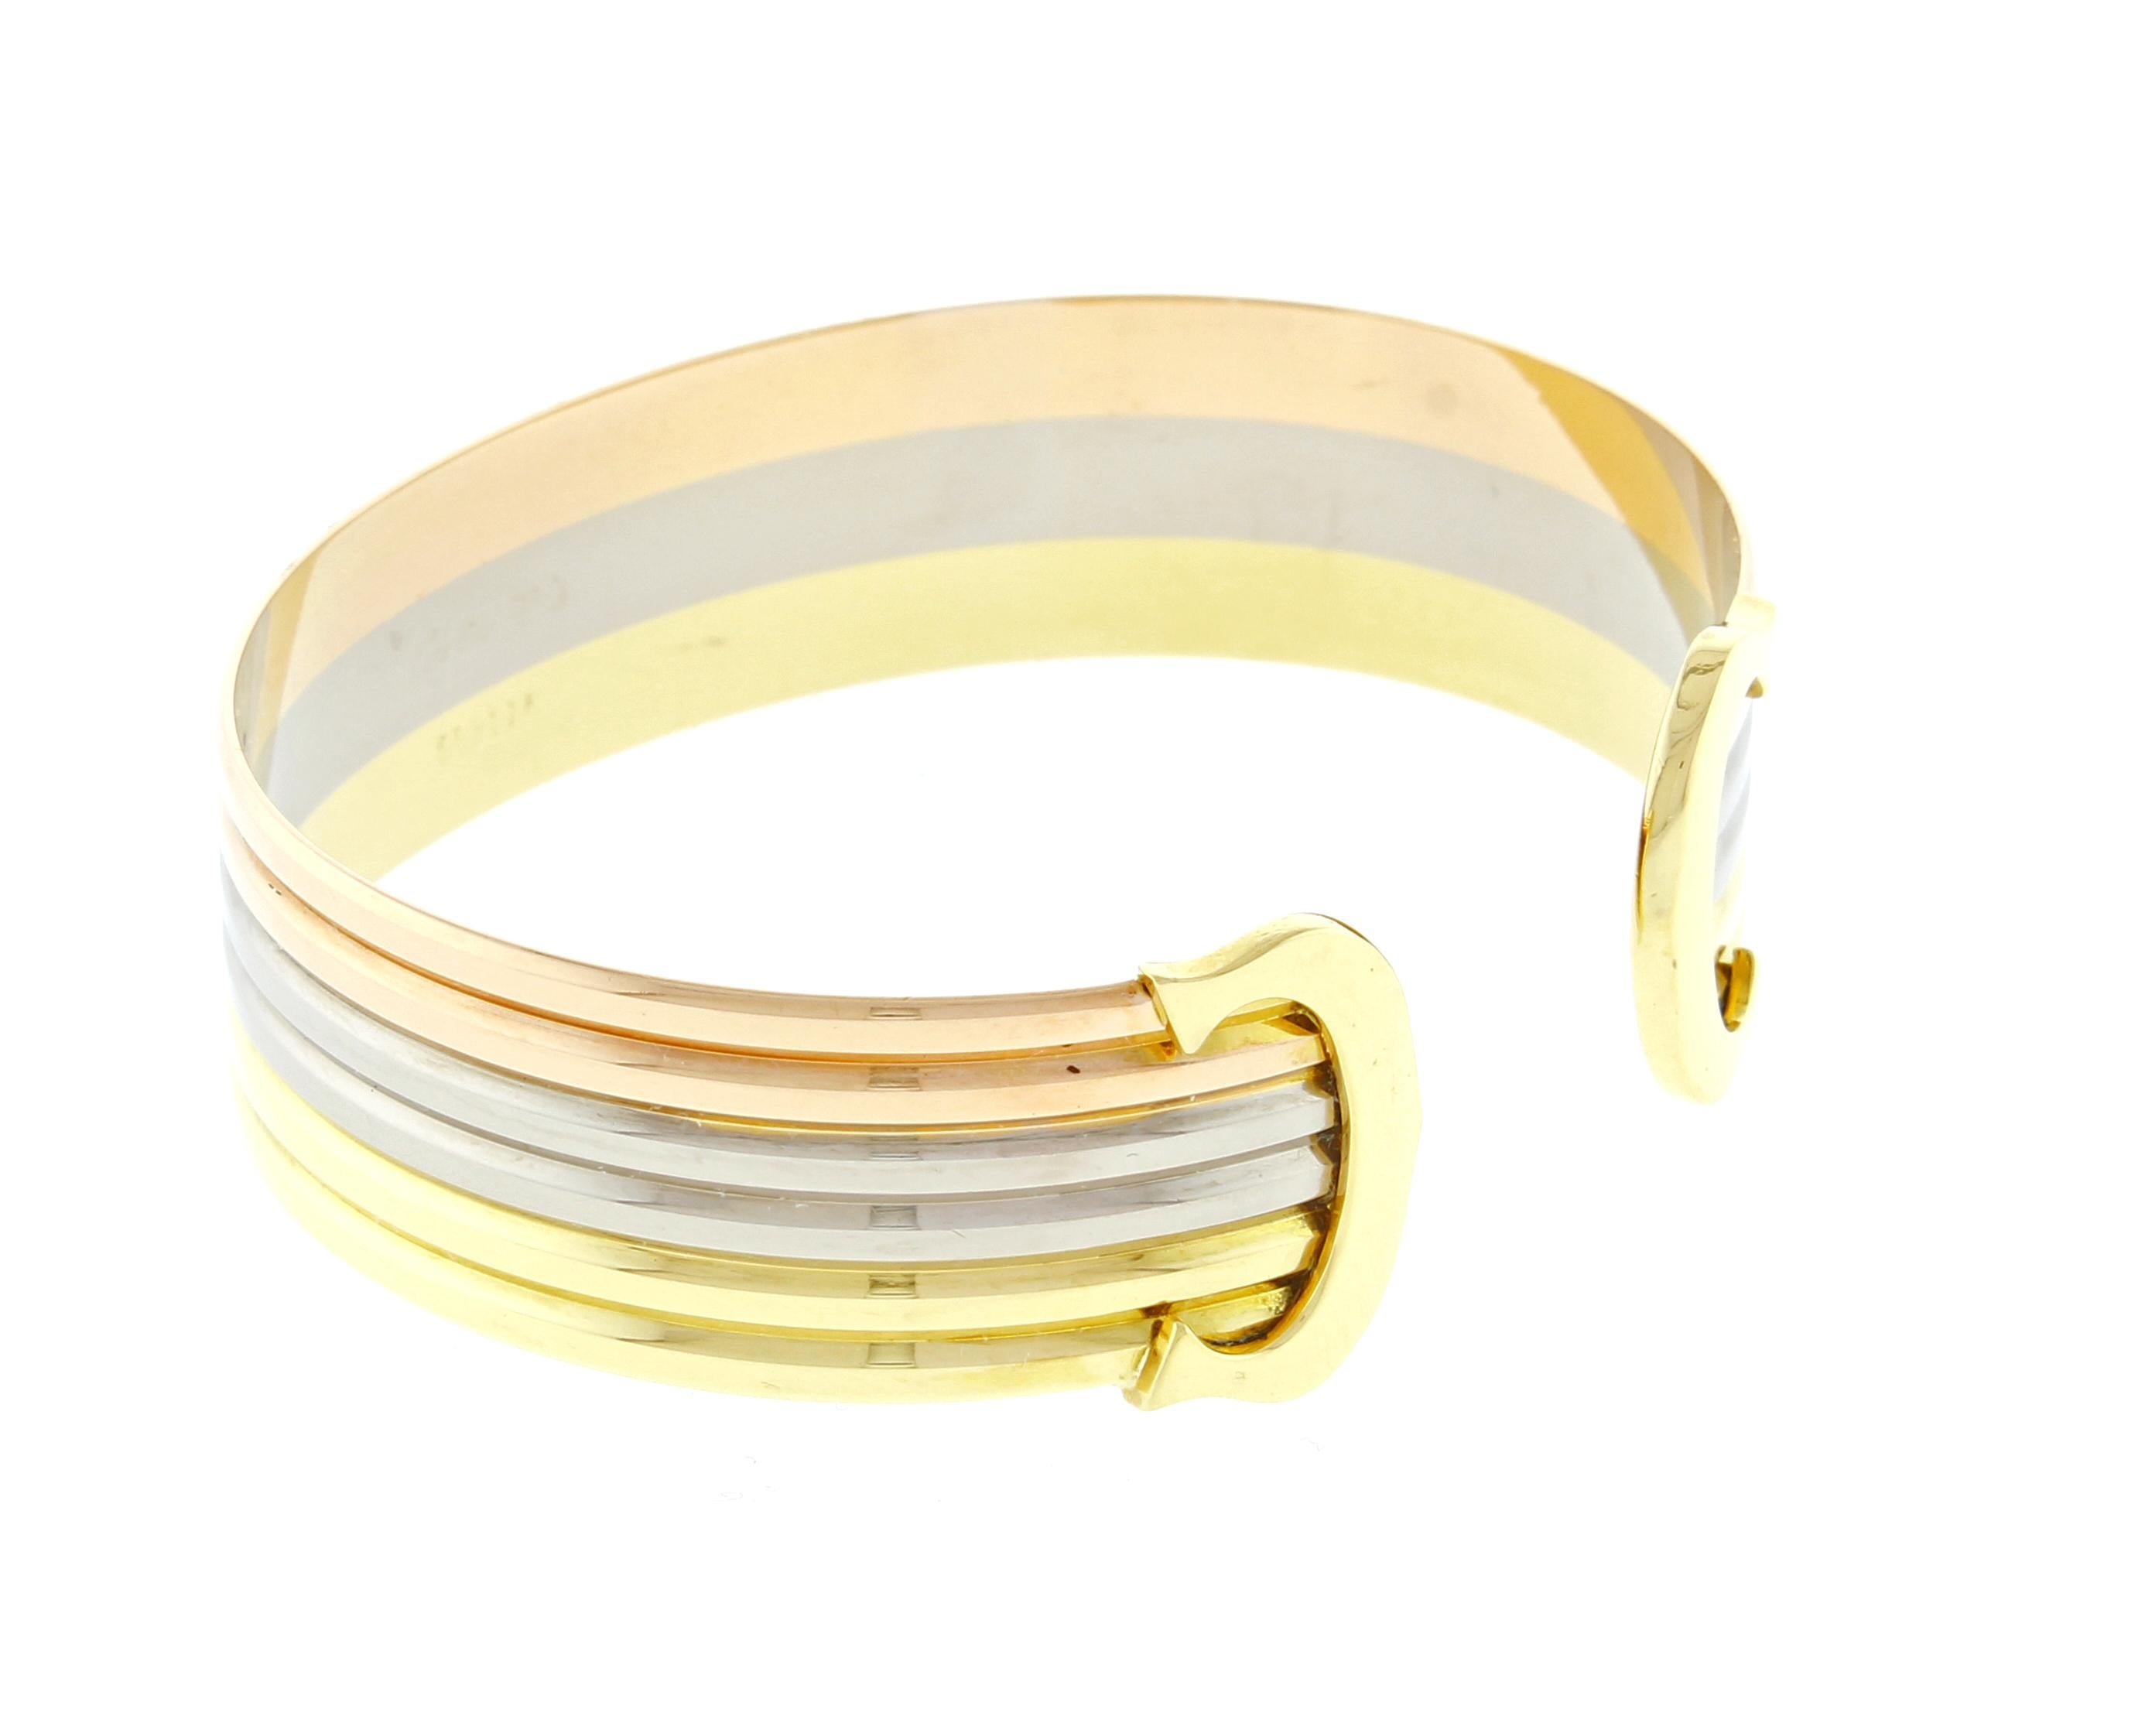 From Cartier, their iconic double C de Cartier decor trinity bracelet. Crafted from white, yellow and pink 18 karat gold. 5/8 of an inch wide,  Medium size